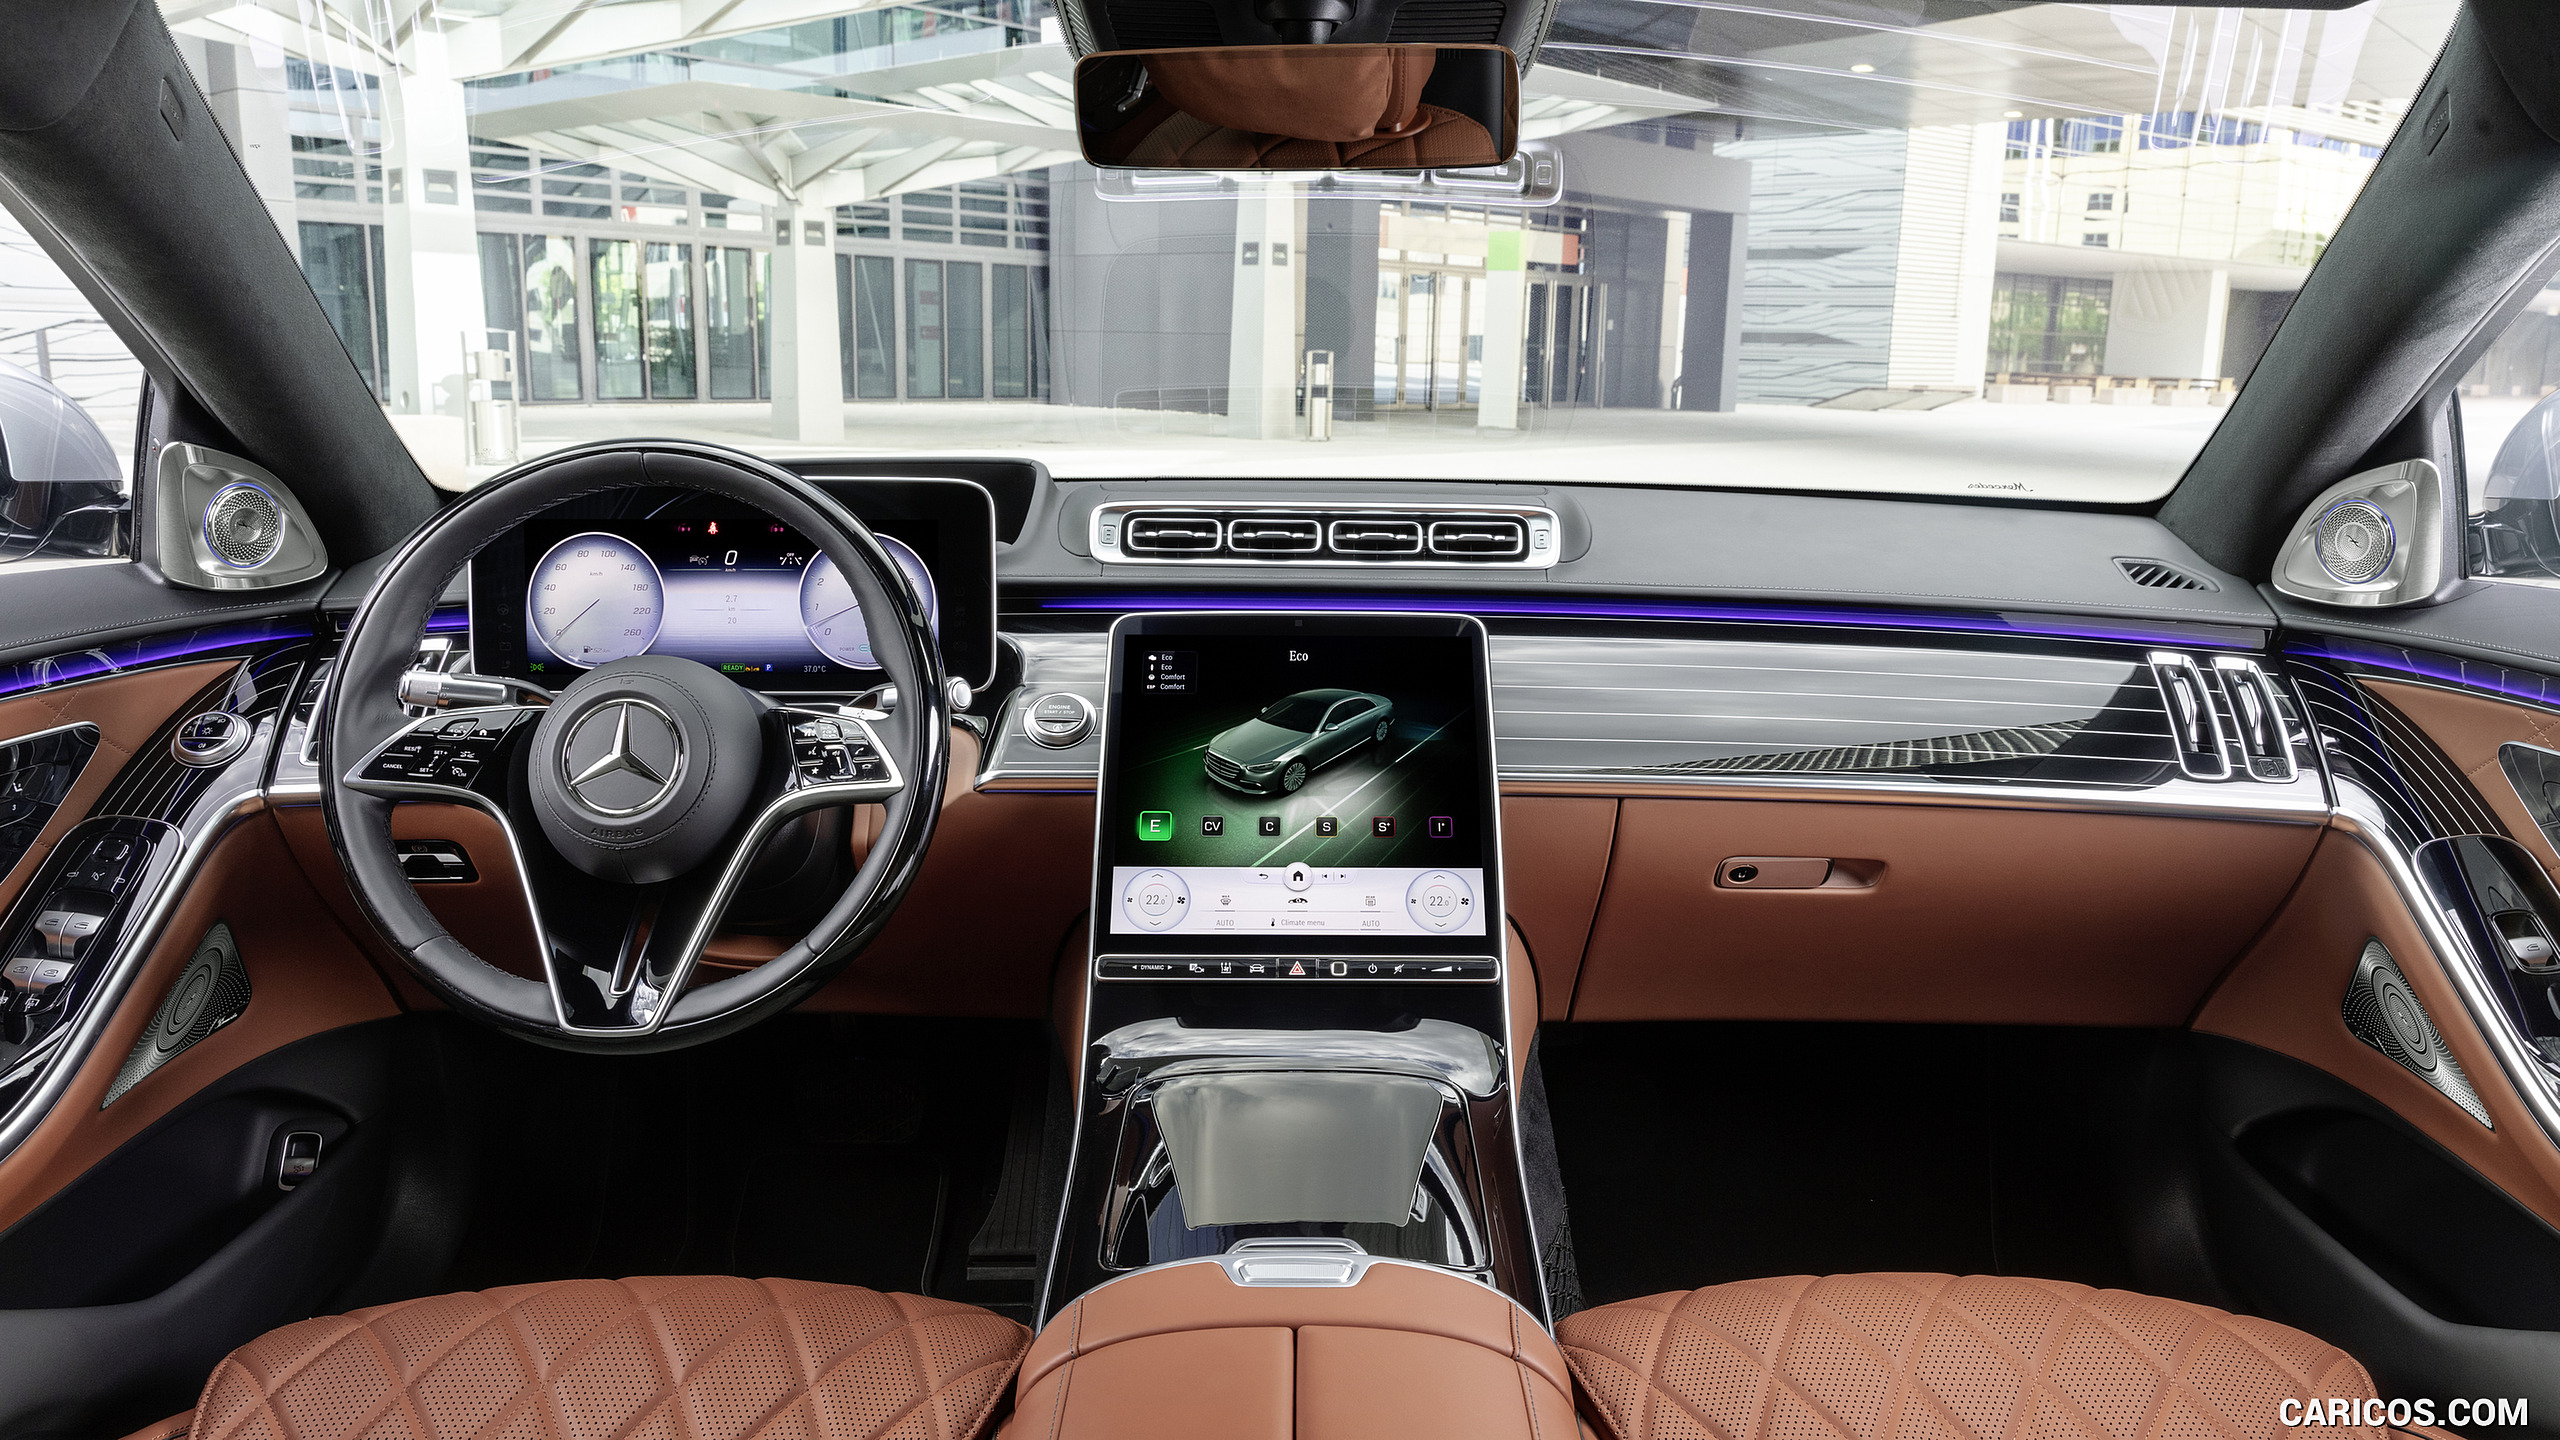 2021 Mercedes-Benz S-Class (Color: Leather Siena Brown) - Interior, Cockpit, #102 of 316